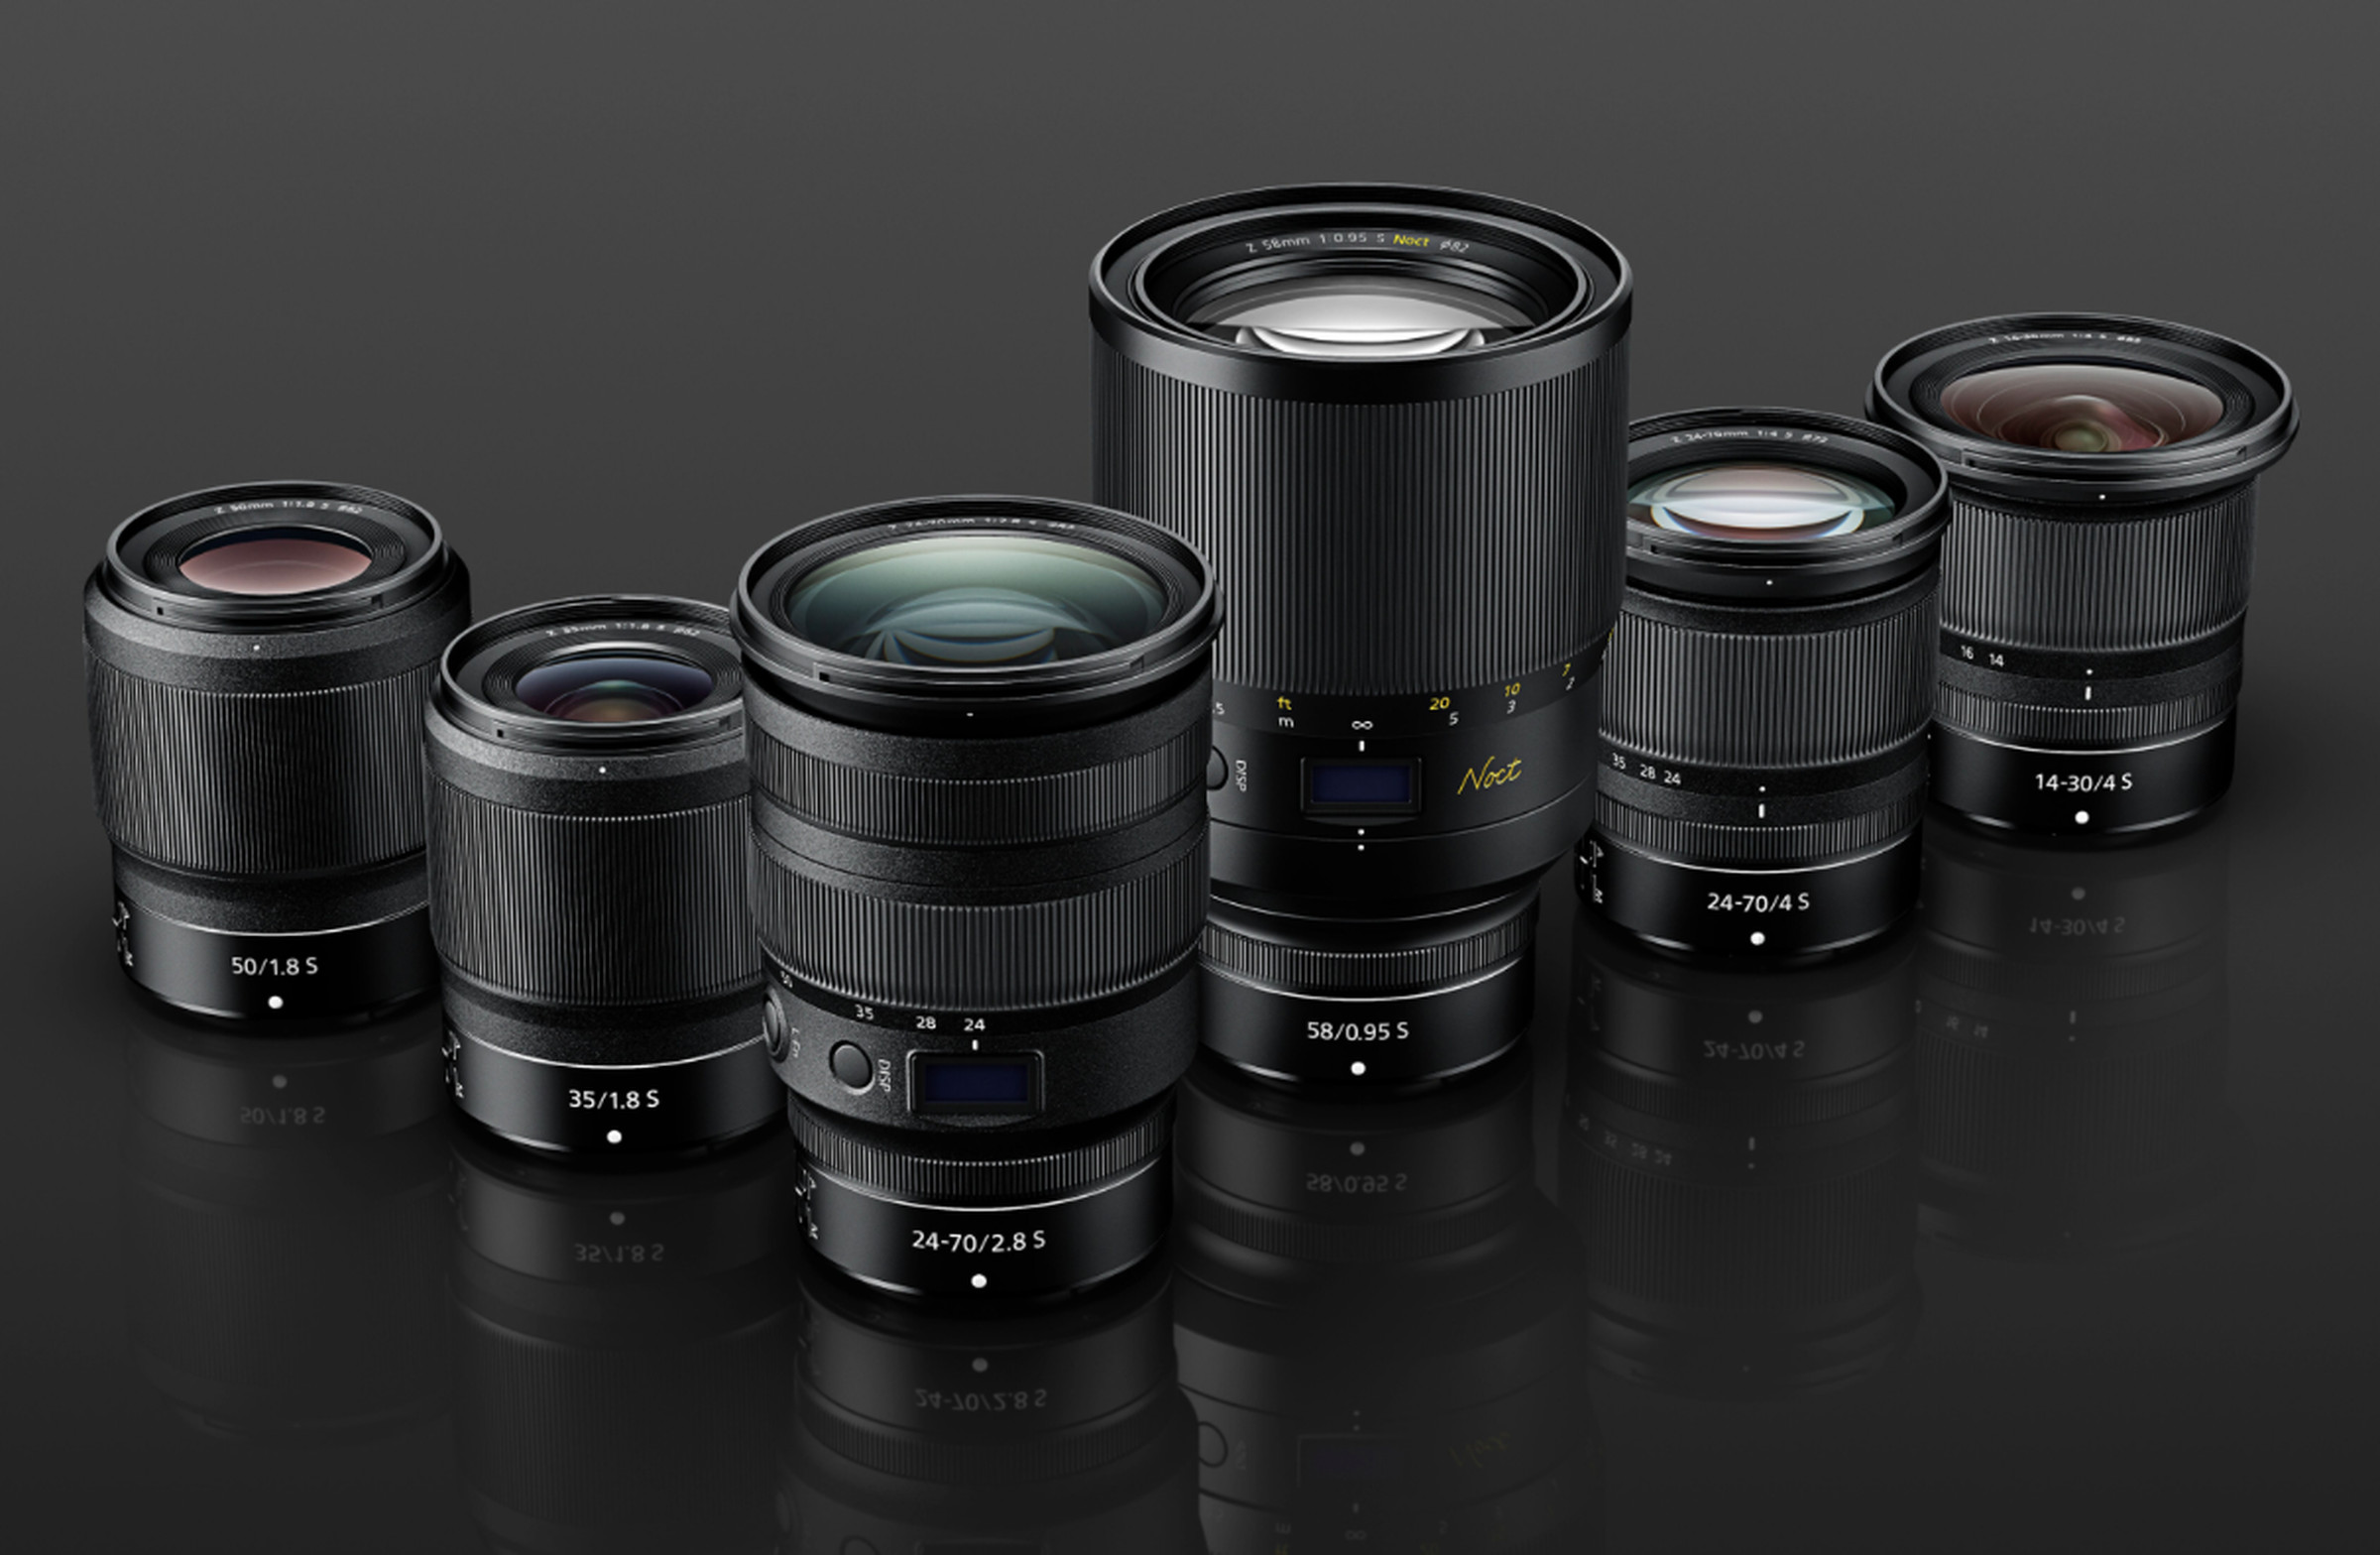 The Z-mount lens family with the new 24-70mm f/2.8 lens and the as-yet-unreleased 58mm f/0.95 lens. 